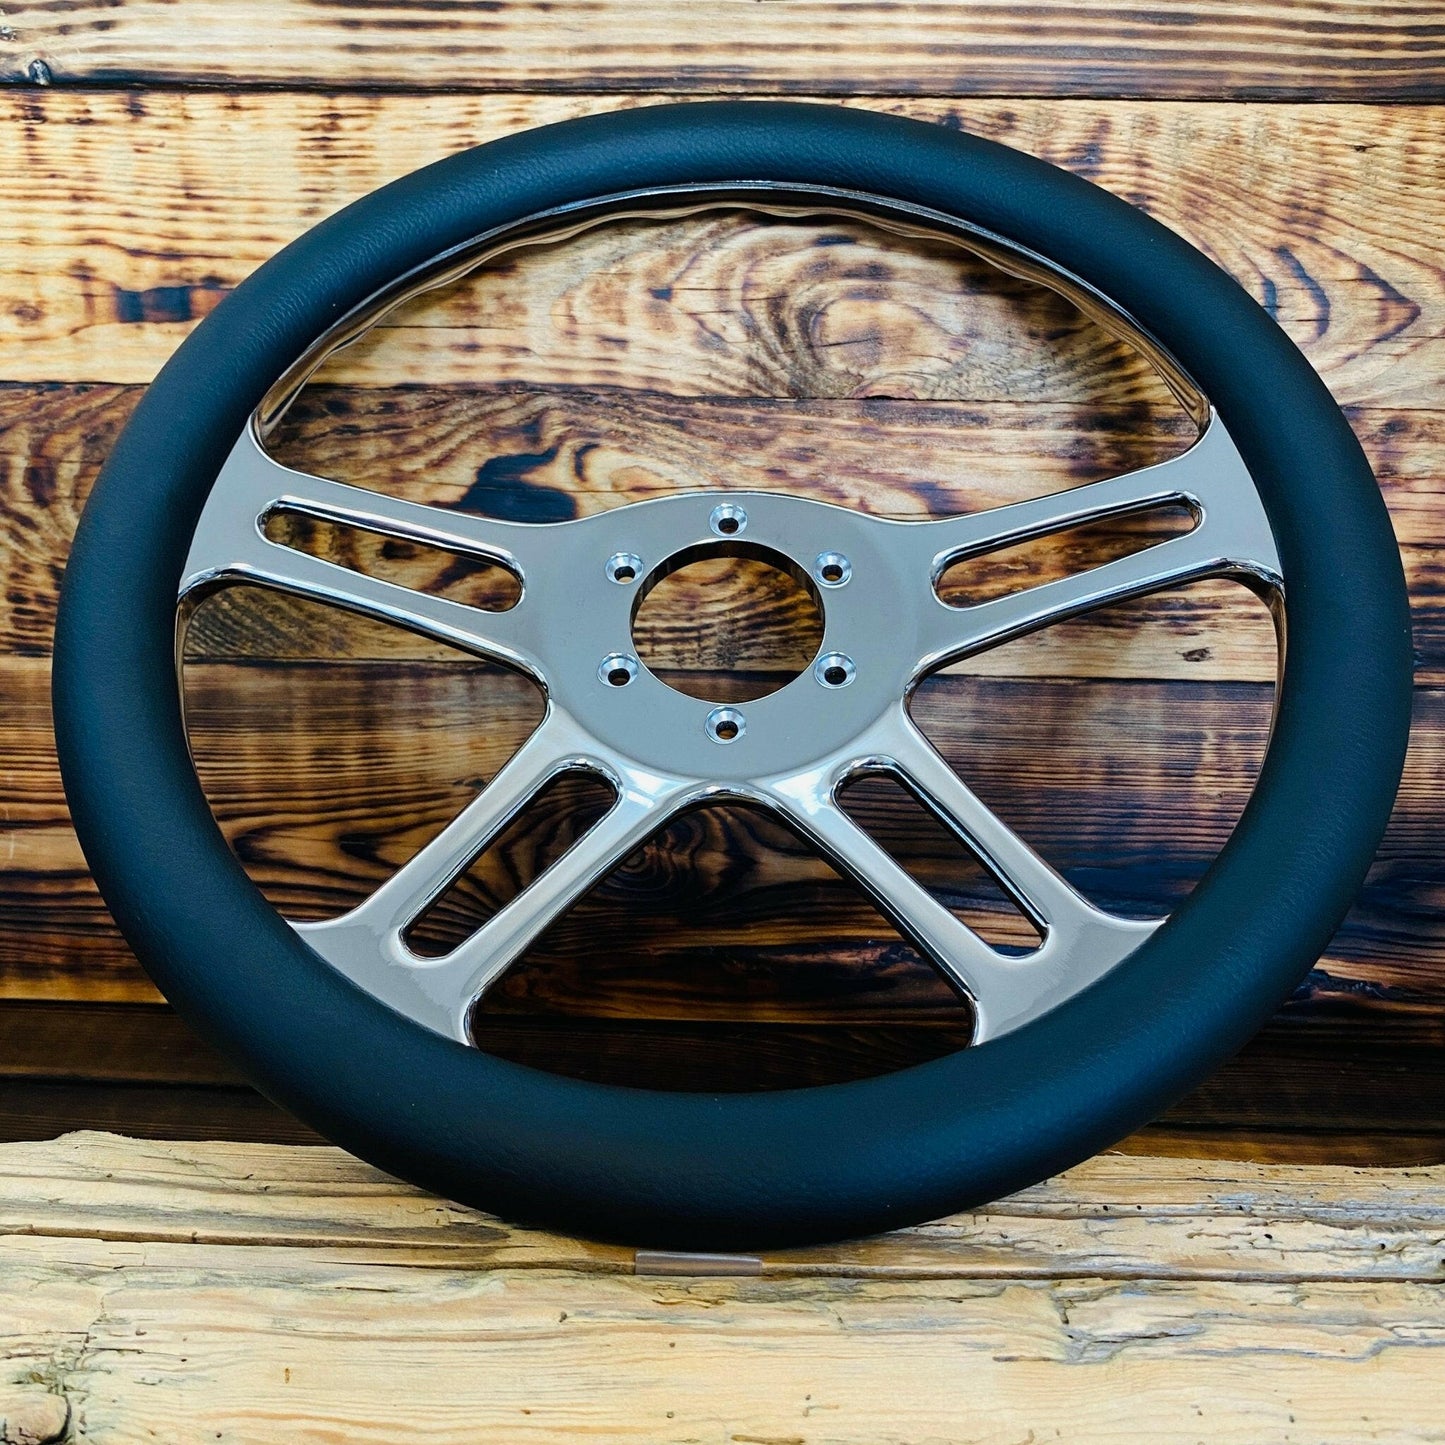 Elegant leather covered for a refined driving experience - Punk Wheels